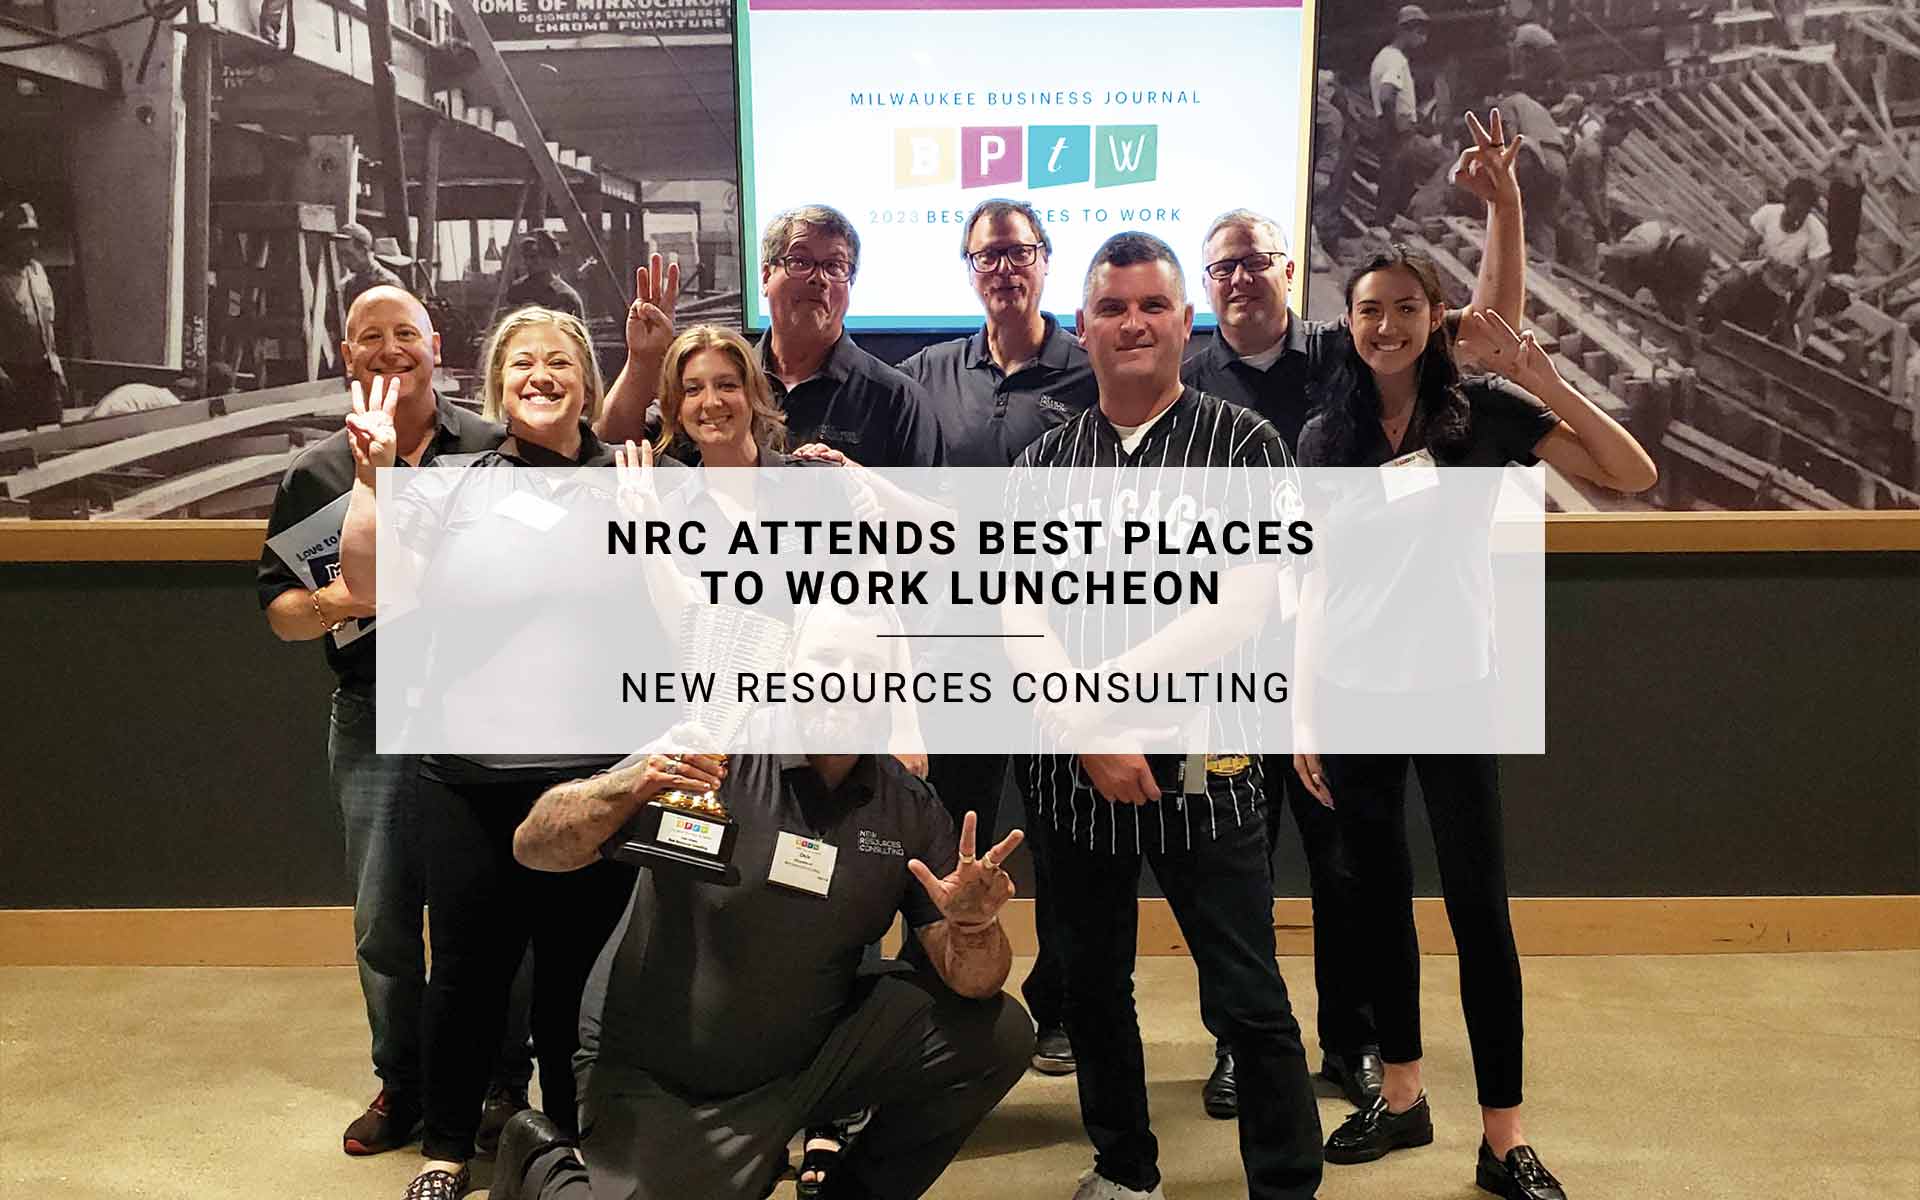 NRC Attends Best Places to Work Luncheon